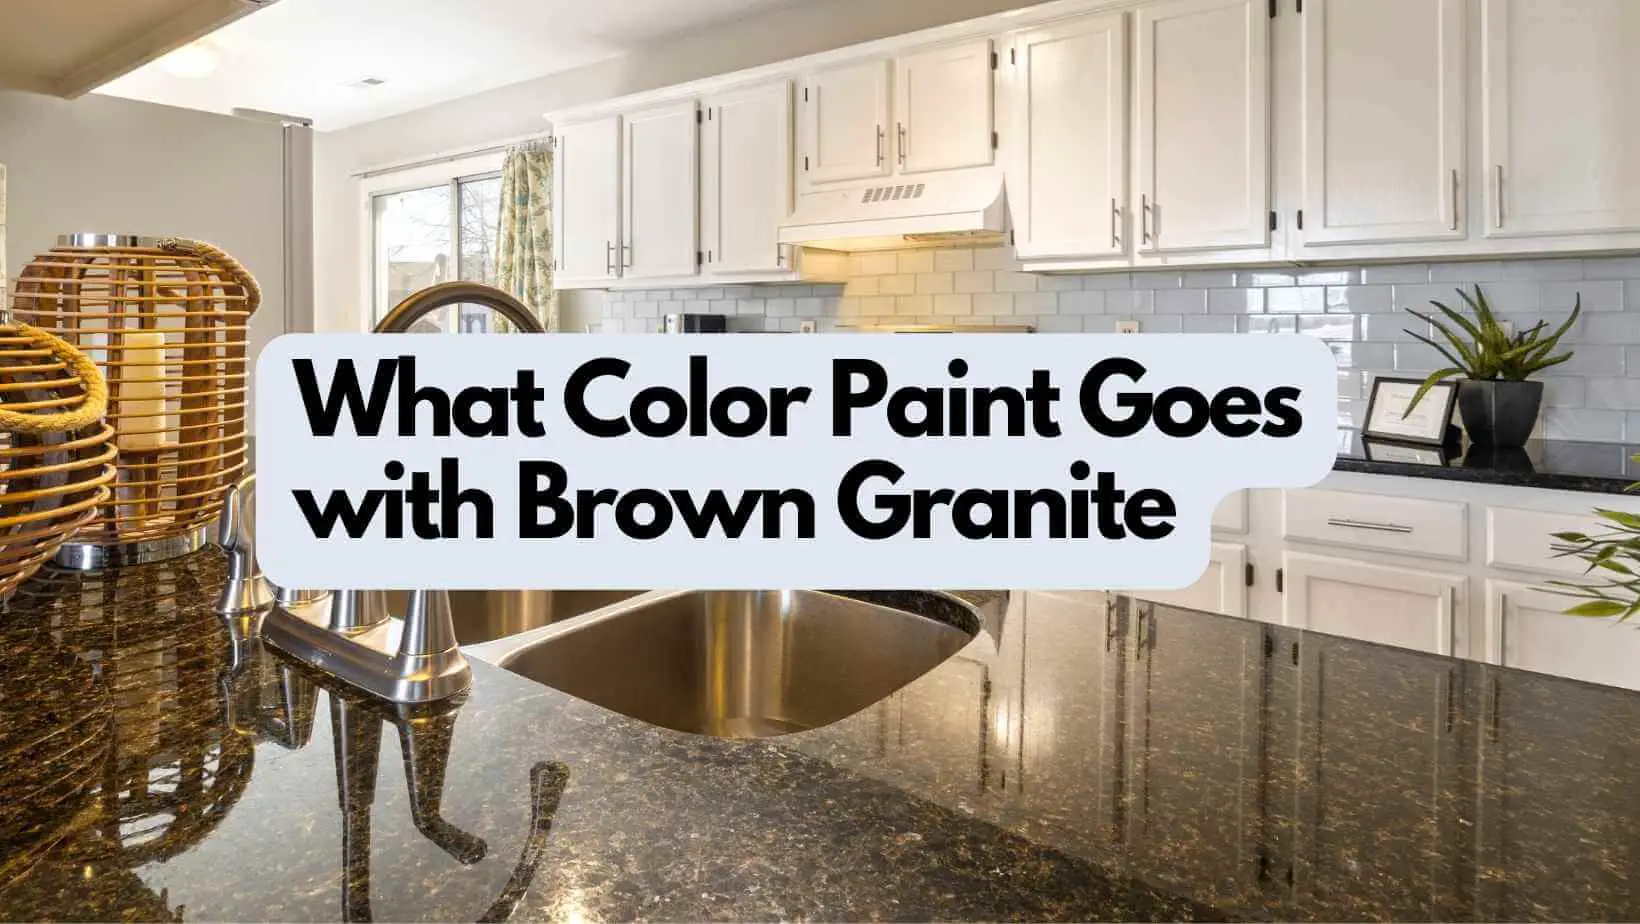 What Color Paint Goes With Brown Granite